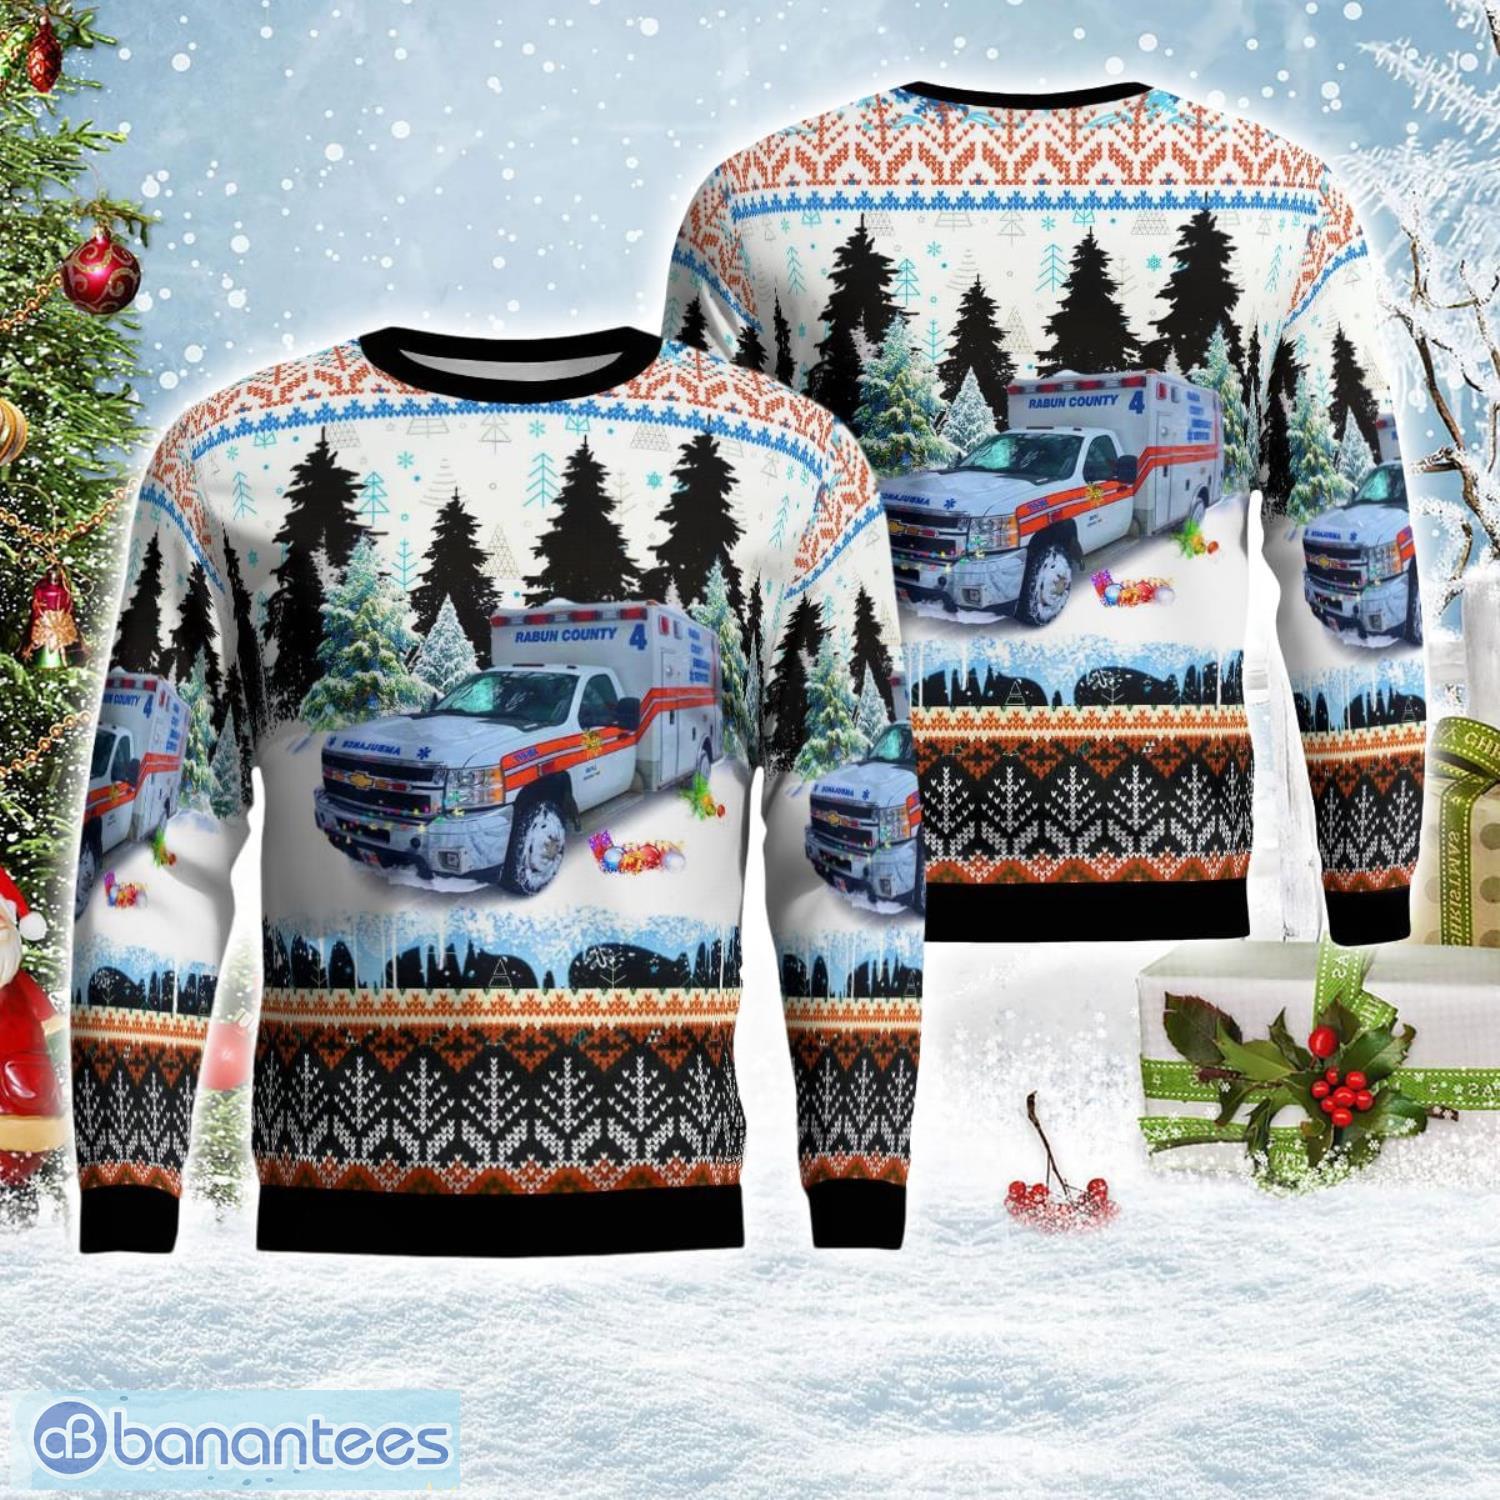 St. Louis Blues NHL Team HoHoHo Mickey Funny Christmas Gift Men And Women Ugly  Christmas Sweater - Freedomdesign